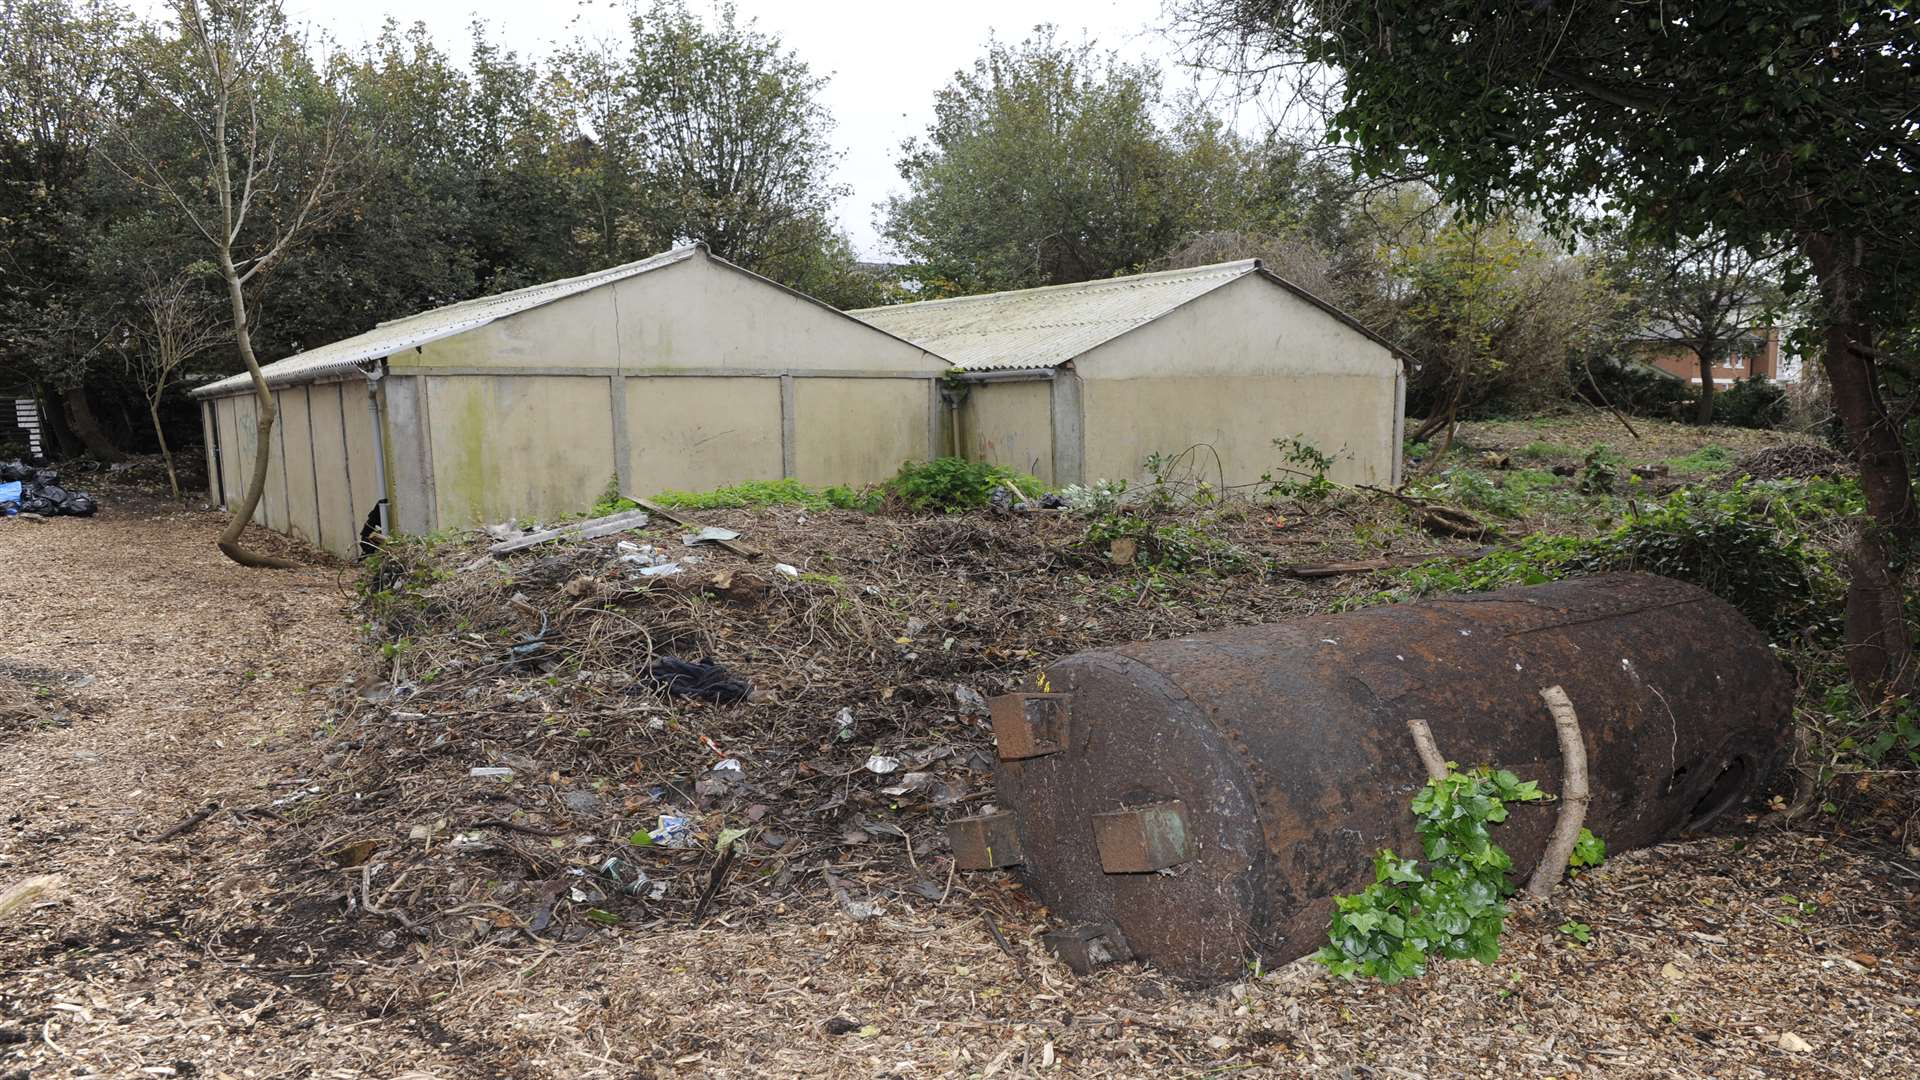 The sheds and an old tank which were hidden by ivy